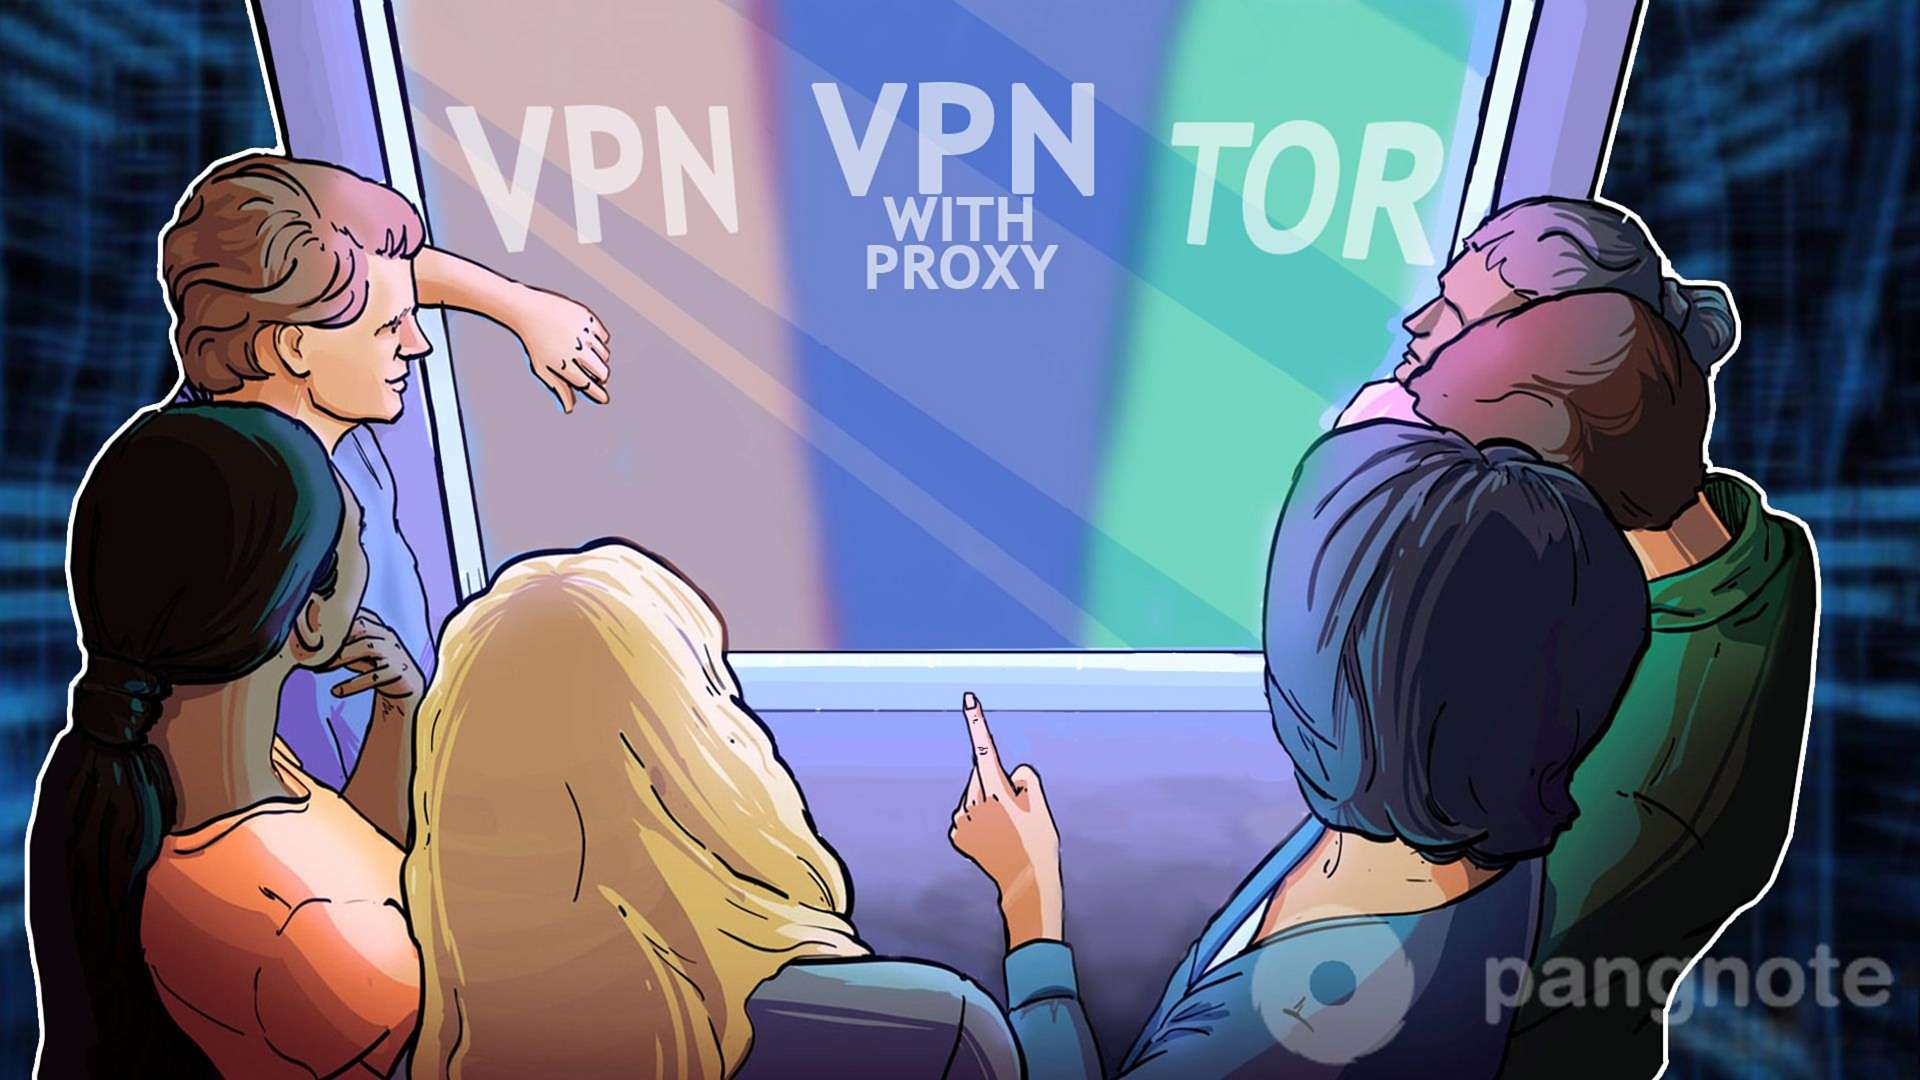 How does it work and VPN comparison VPN with proxy and Tor